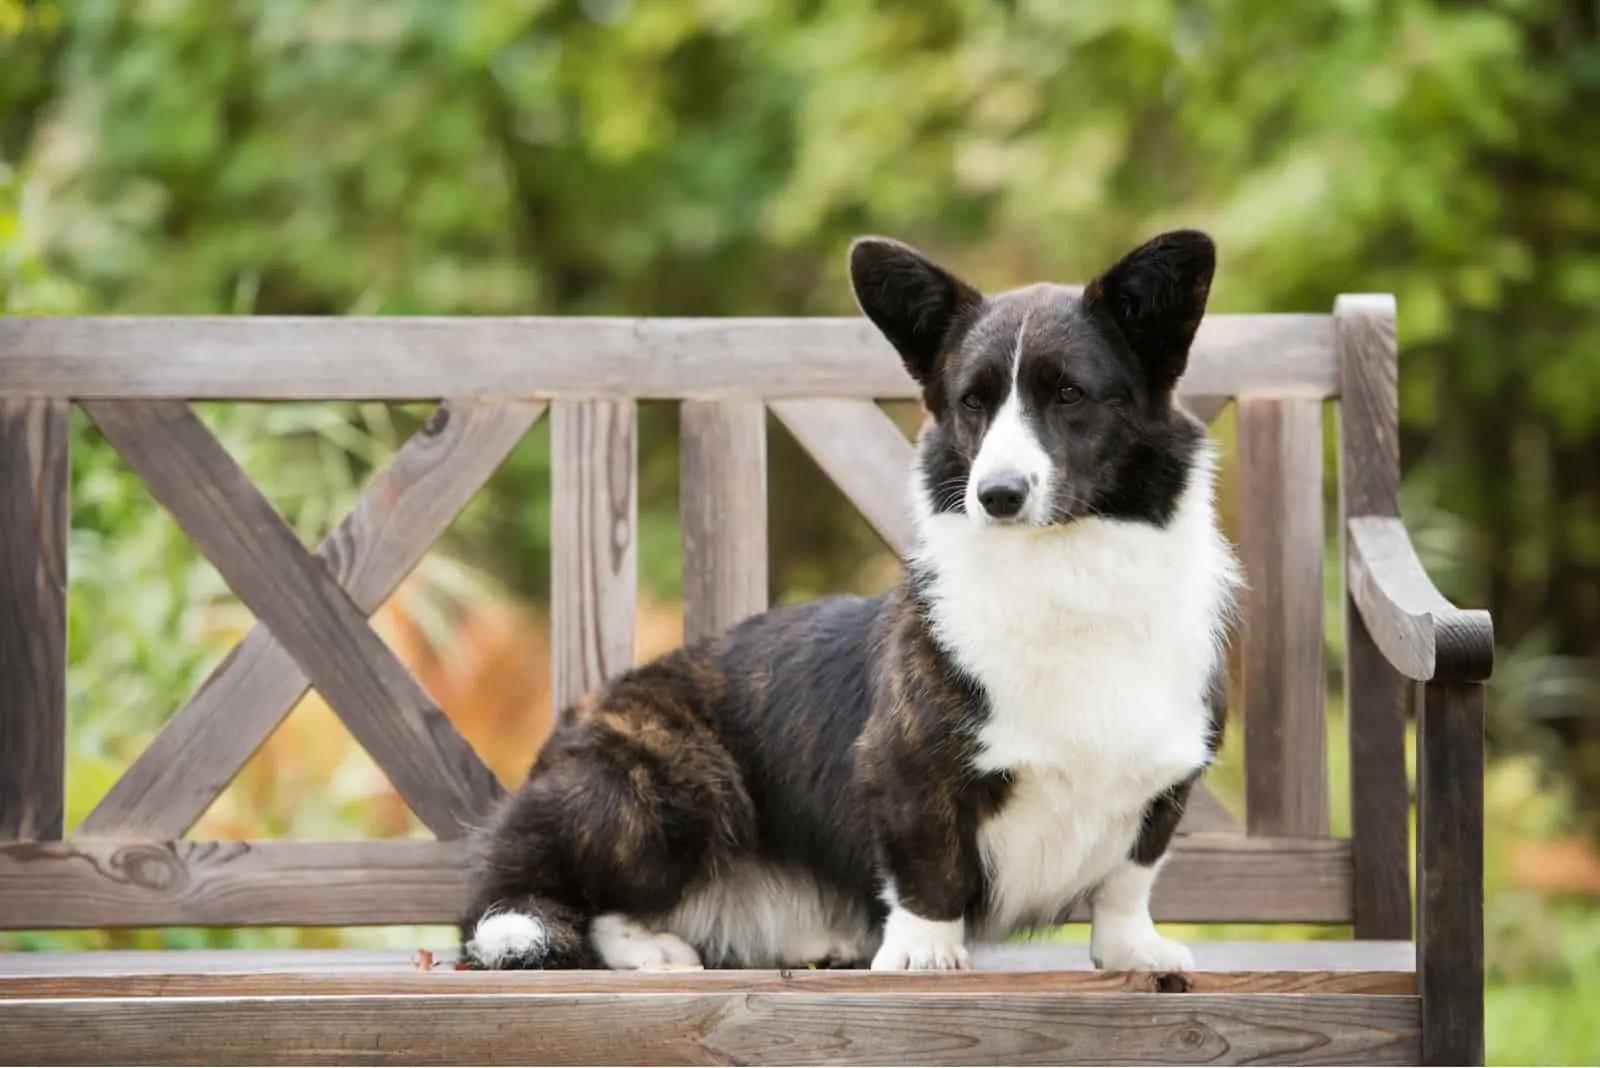 Welsh corgi cardigan sits on the bench in the yard